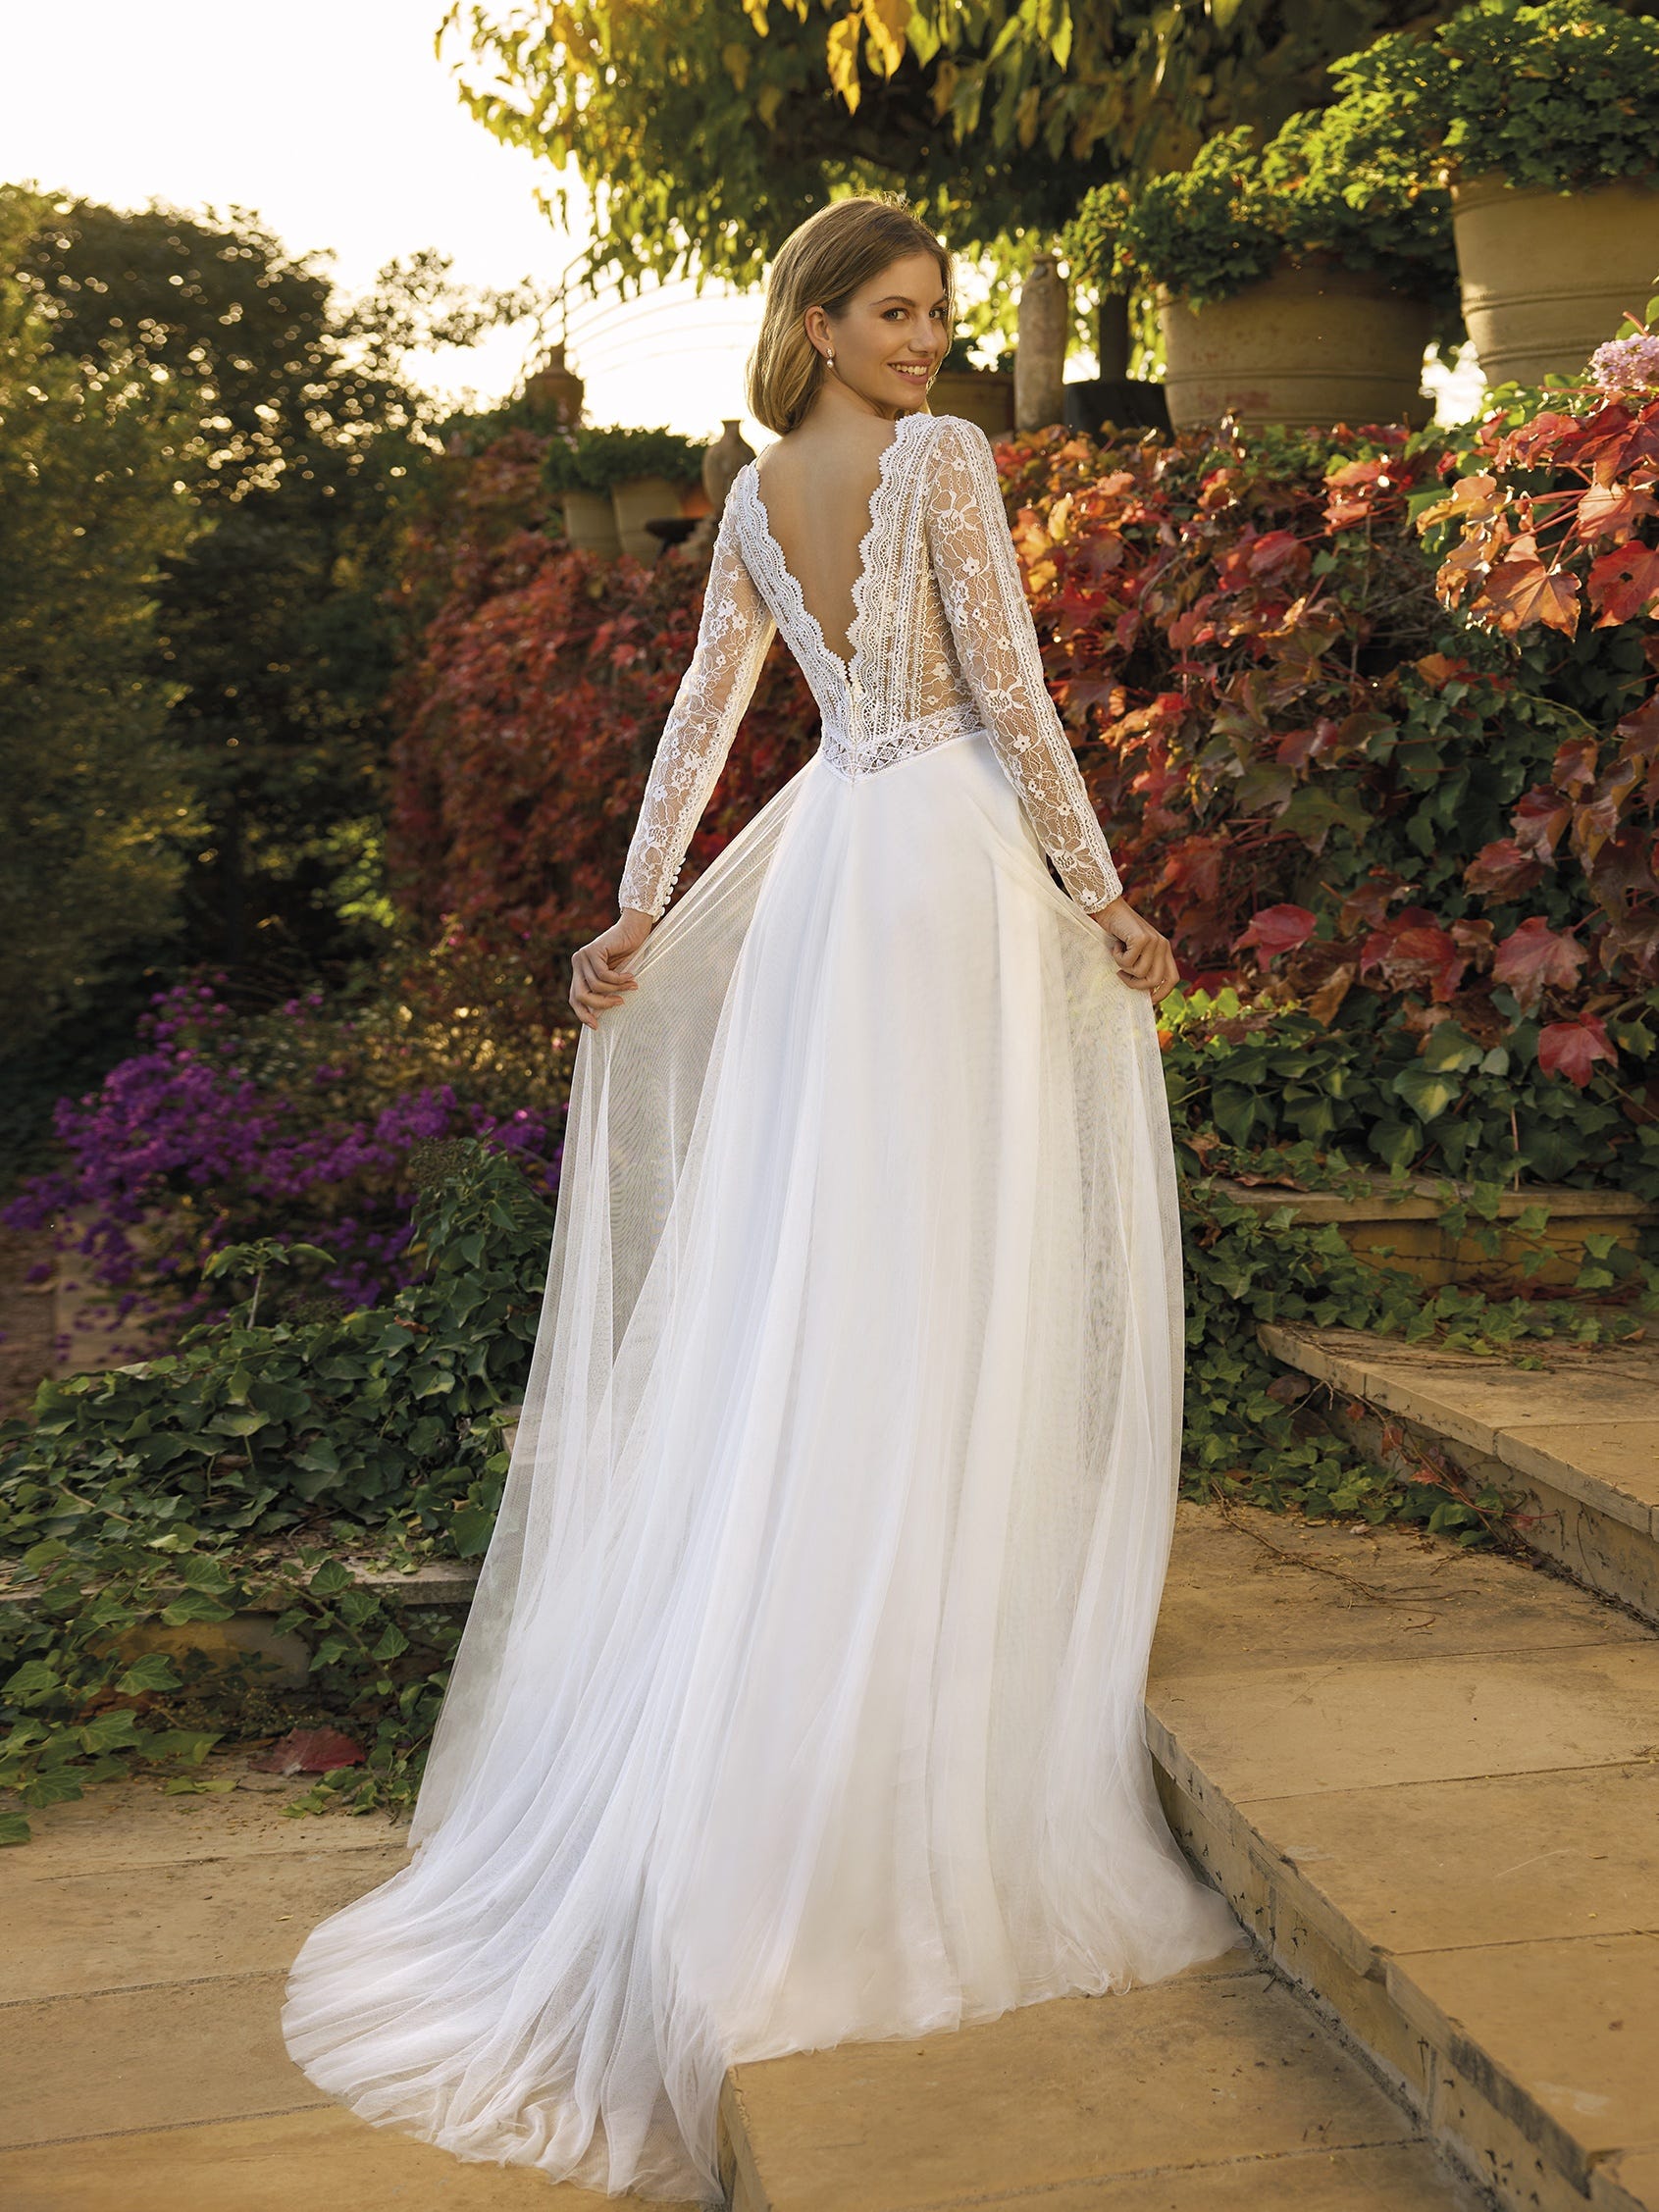 Strapless A-line Wedding Dress With Lace Underlayer | Kleinfeld Bridal